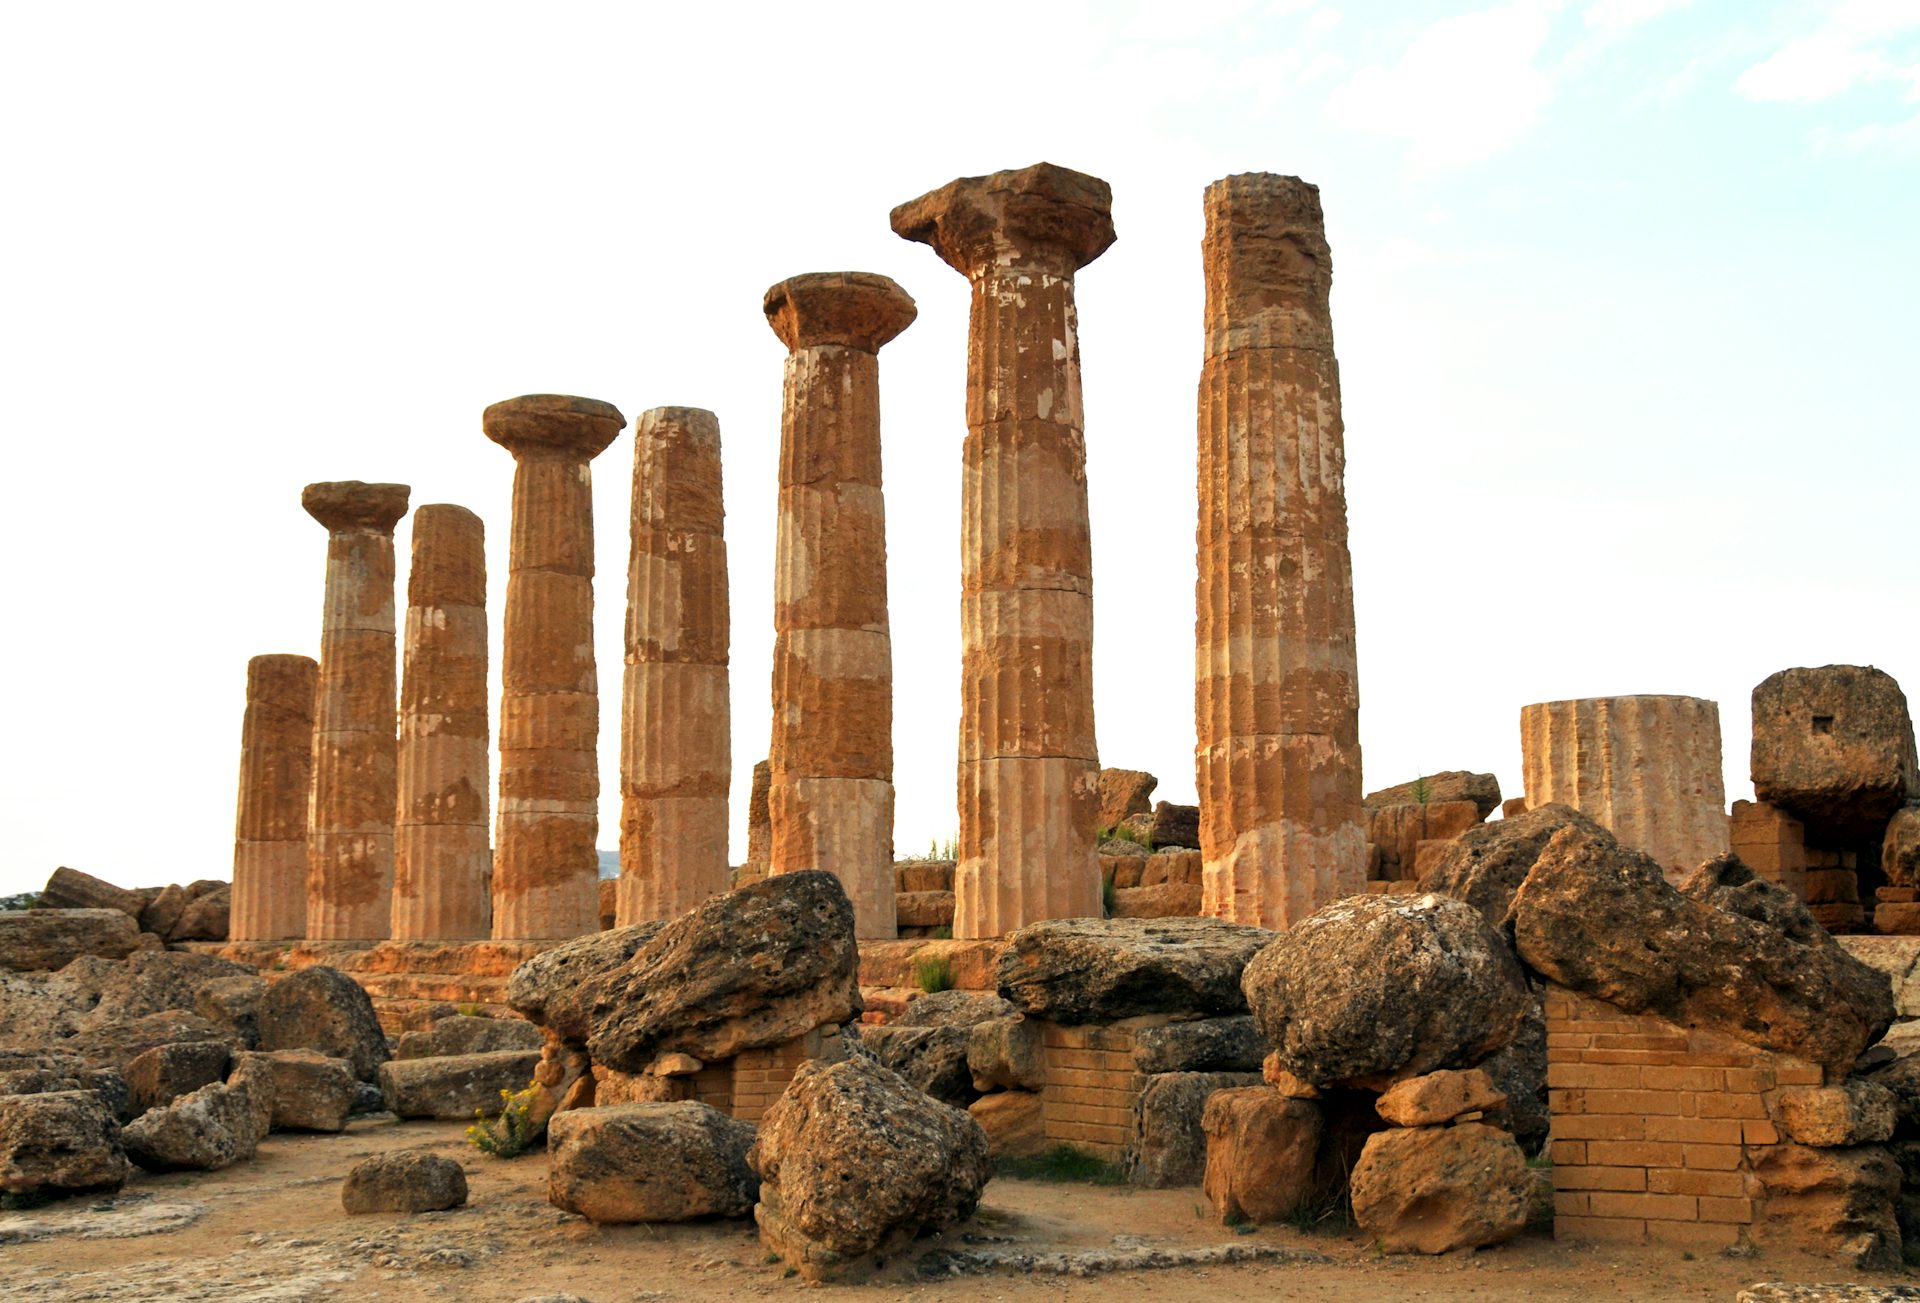 Temple of Hercules-Agrigento, Sicily